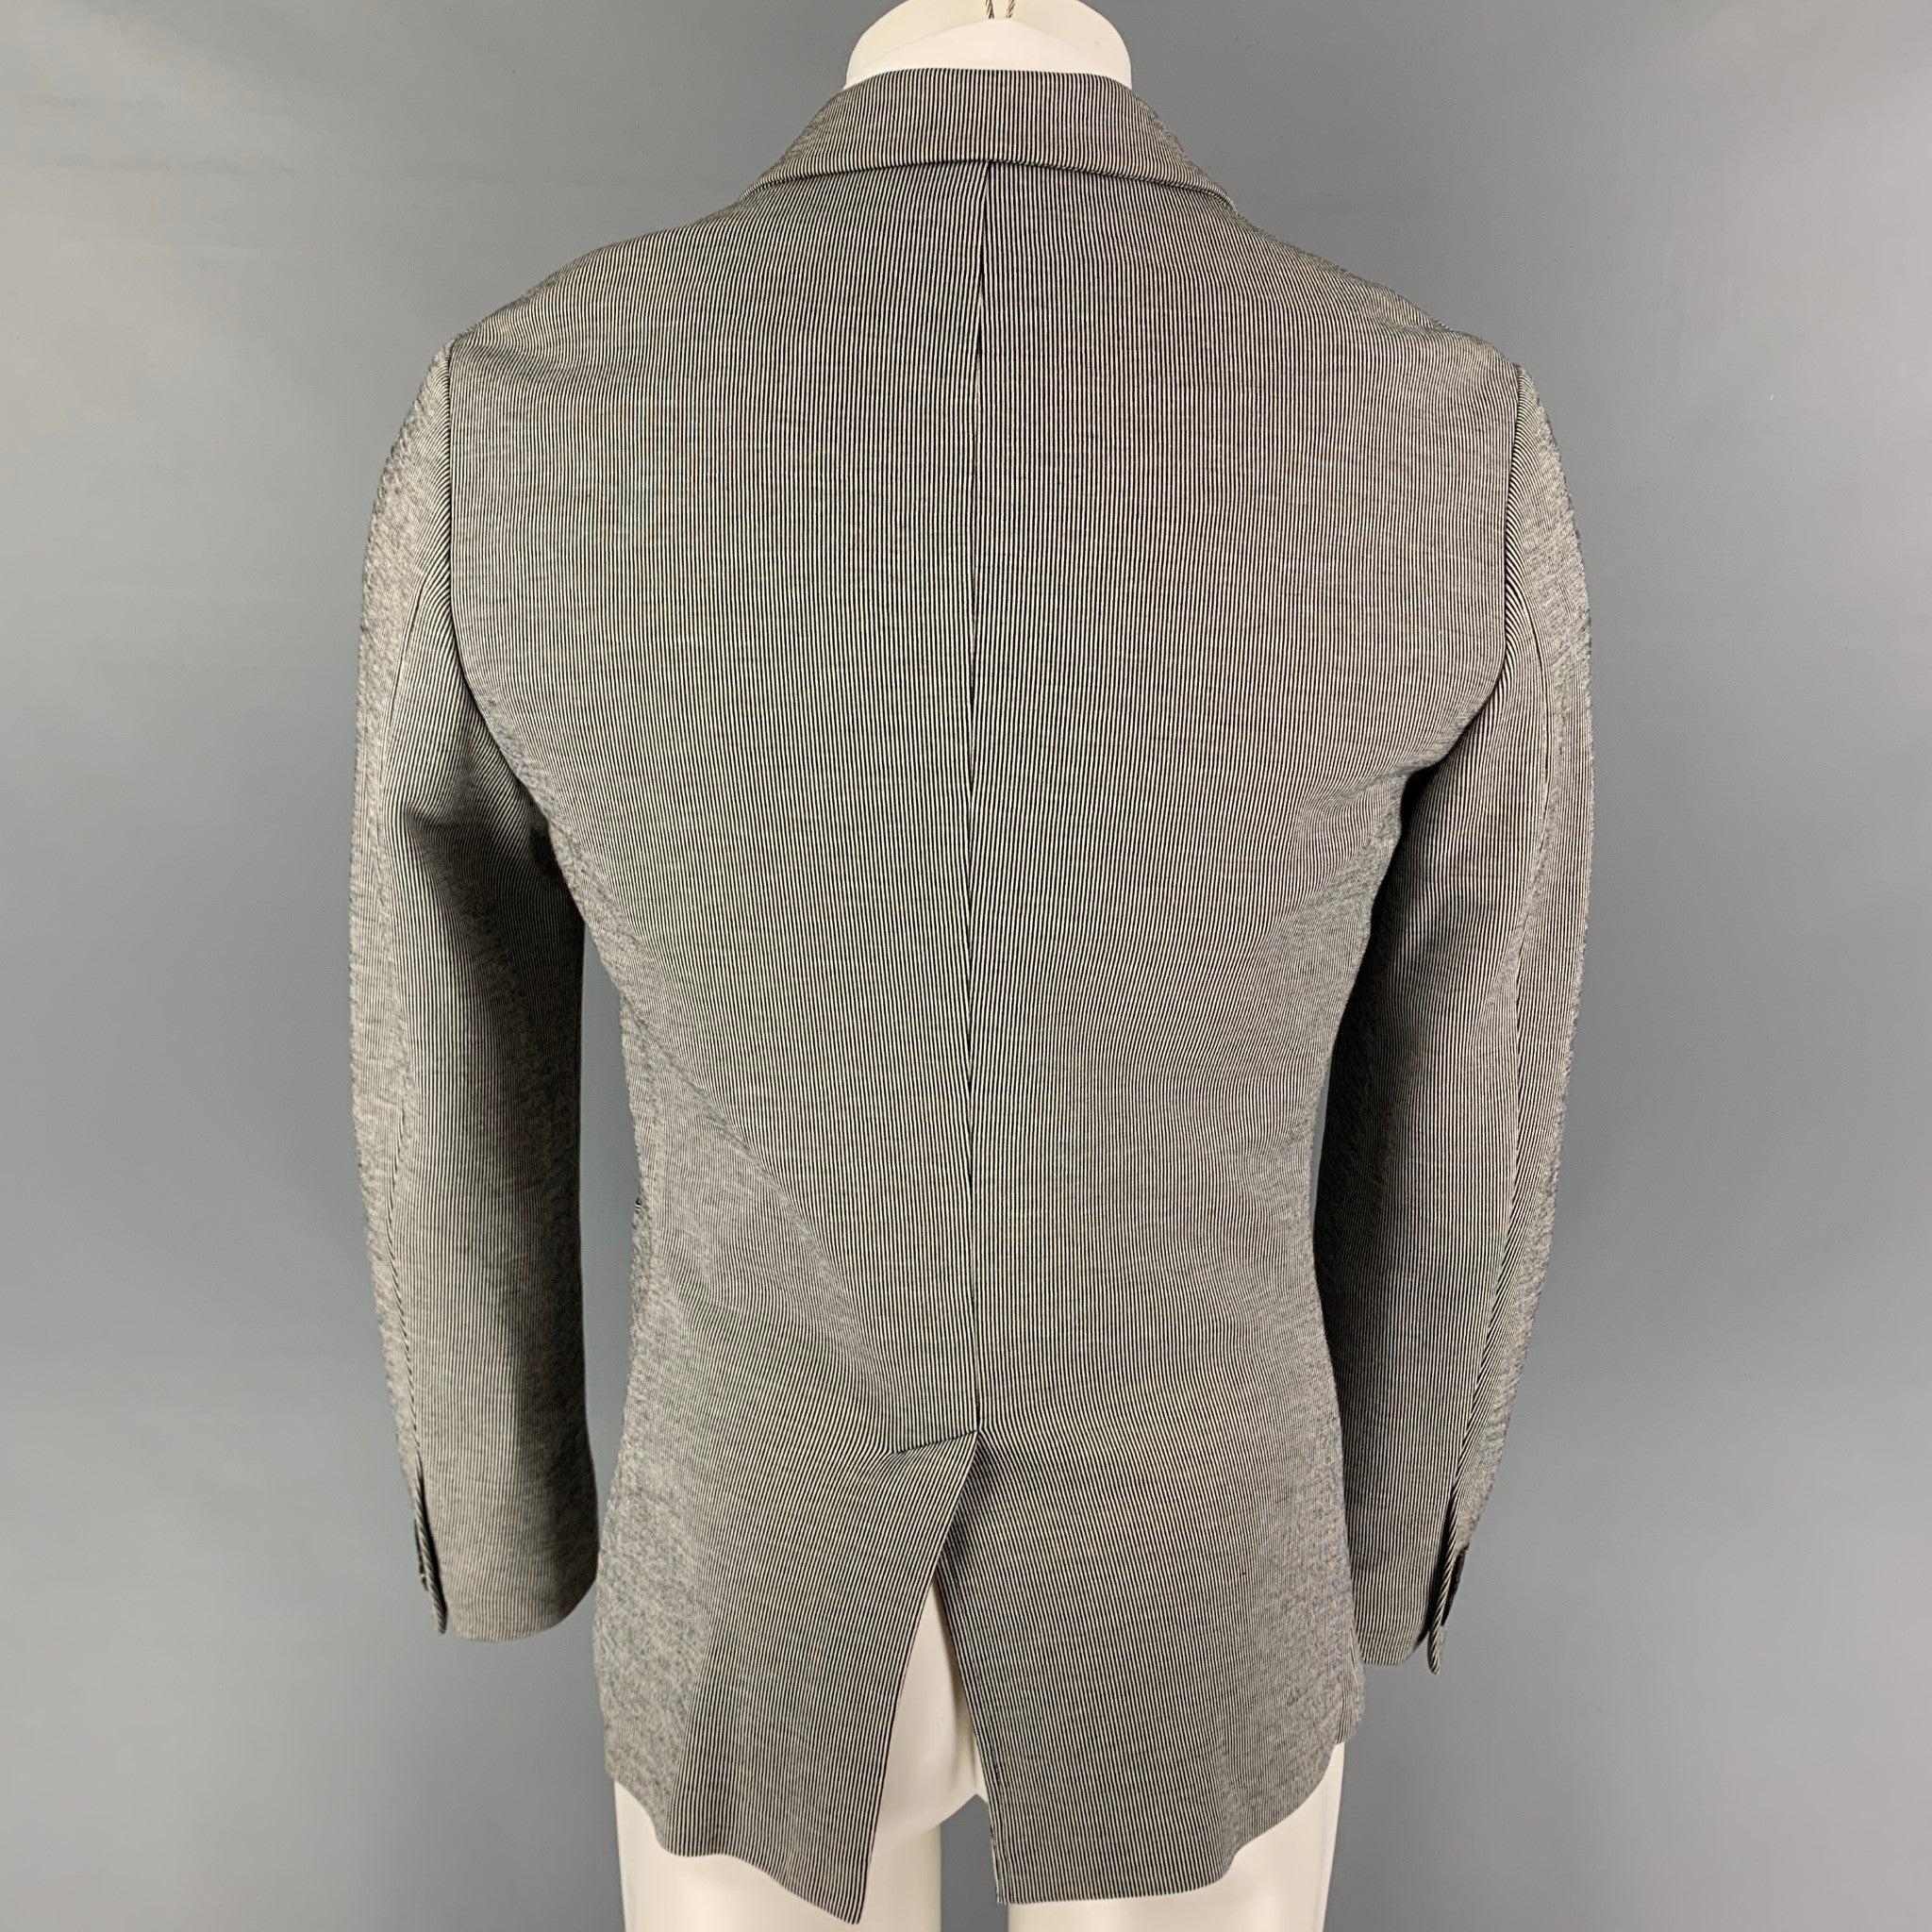 JOHN VARVATOS Size 36 Black Beige Pinstripe Cotton Polyester Sport Coat In Good Condition For Sale In San Francisco, CA